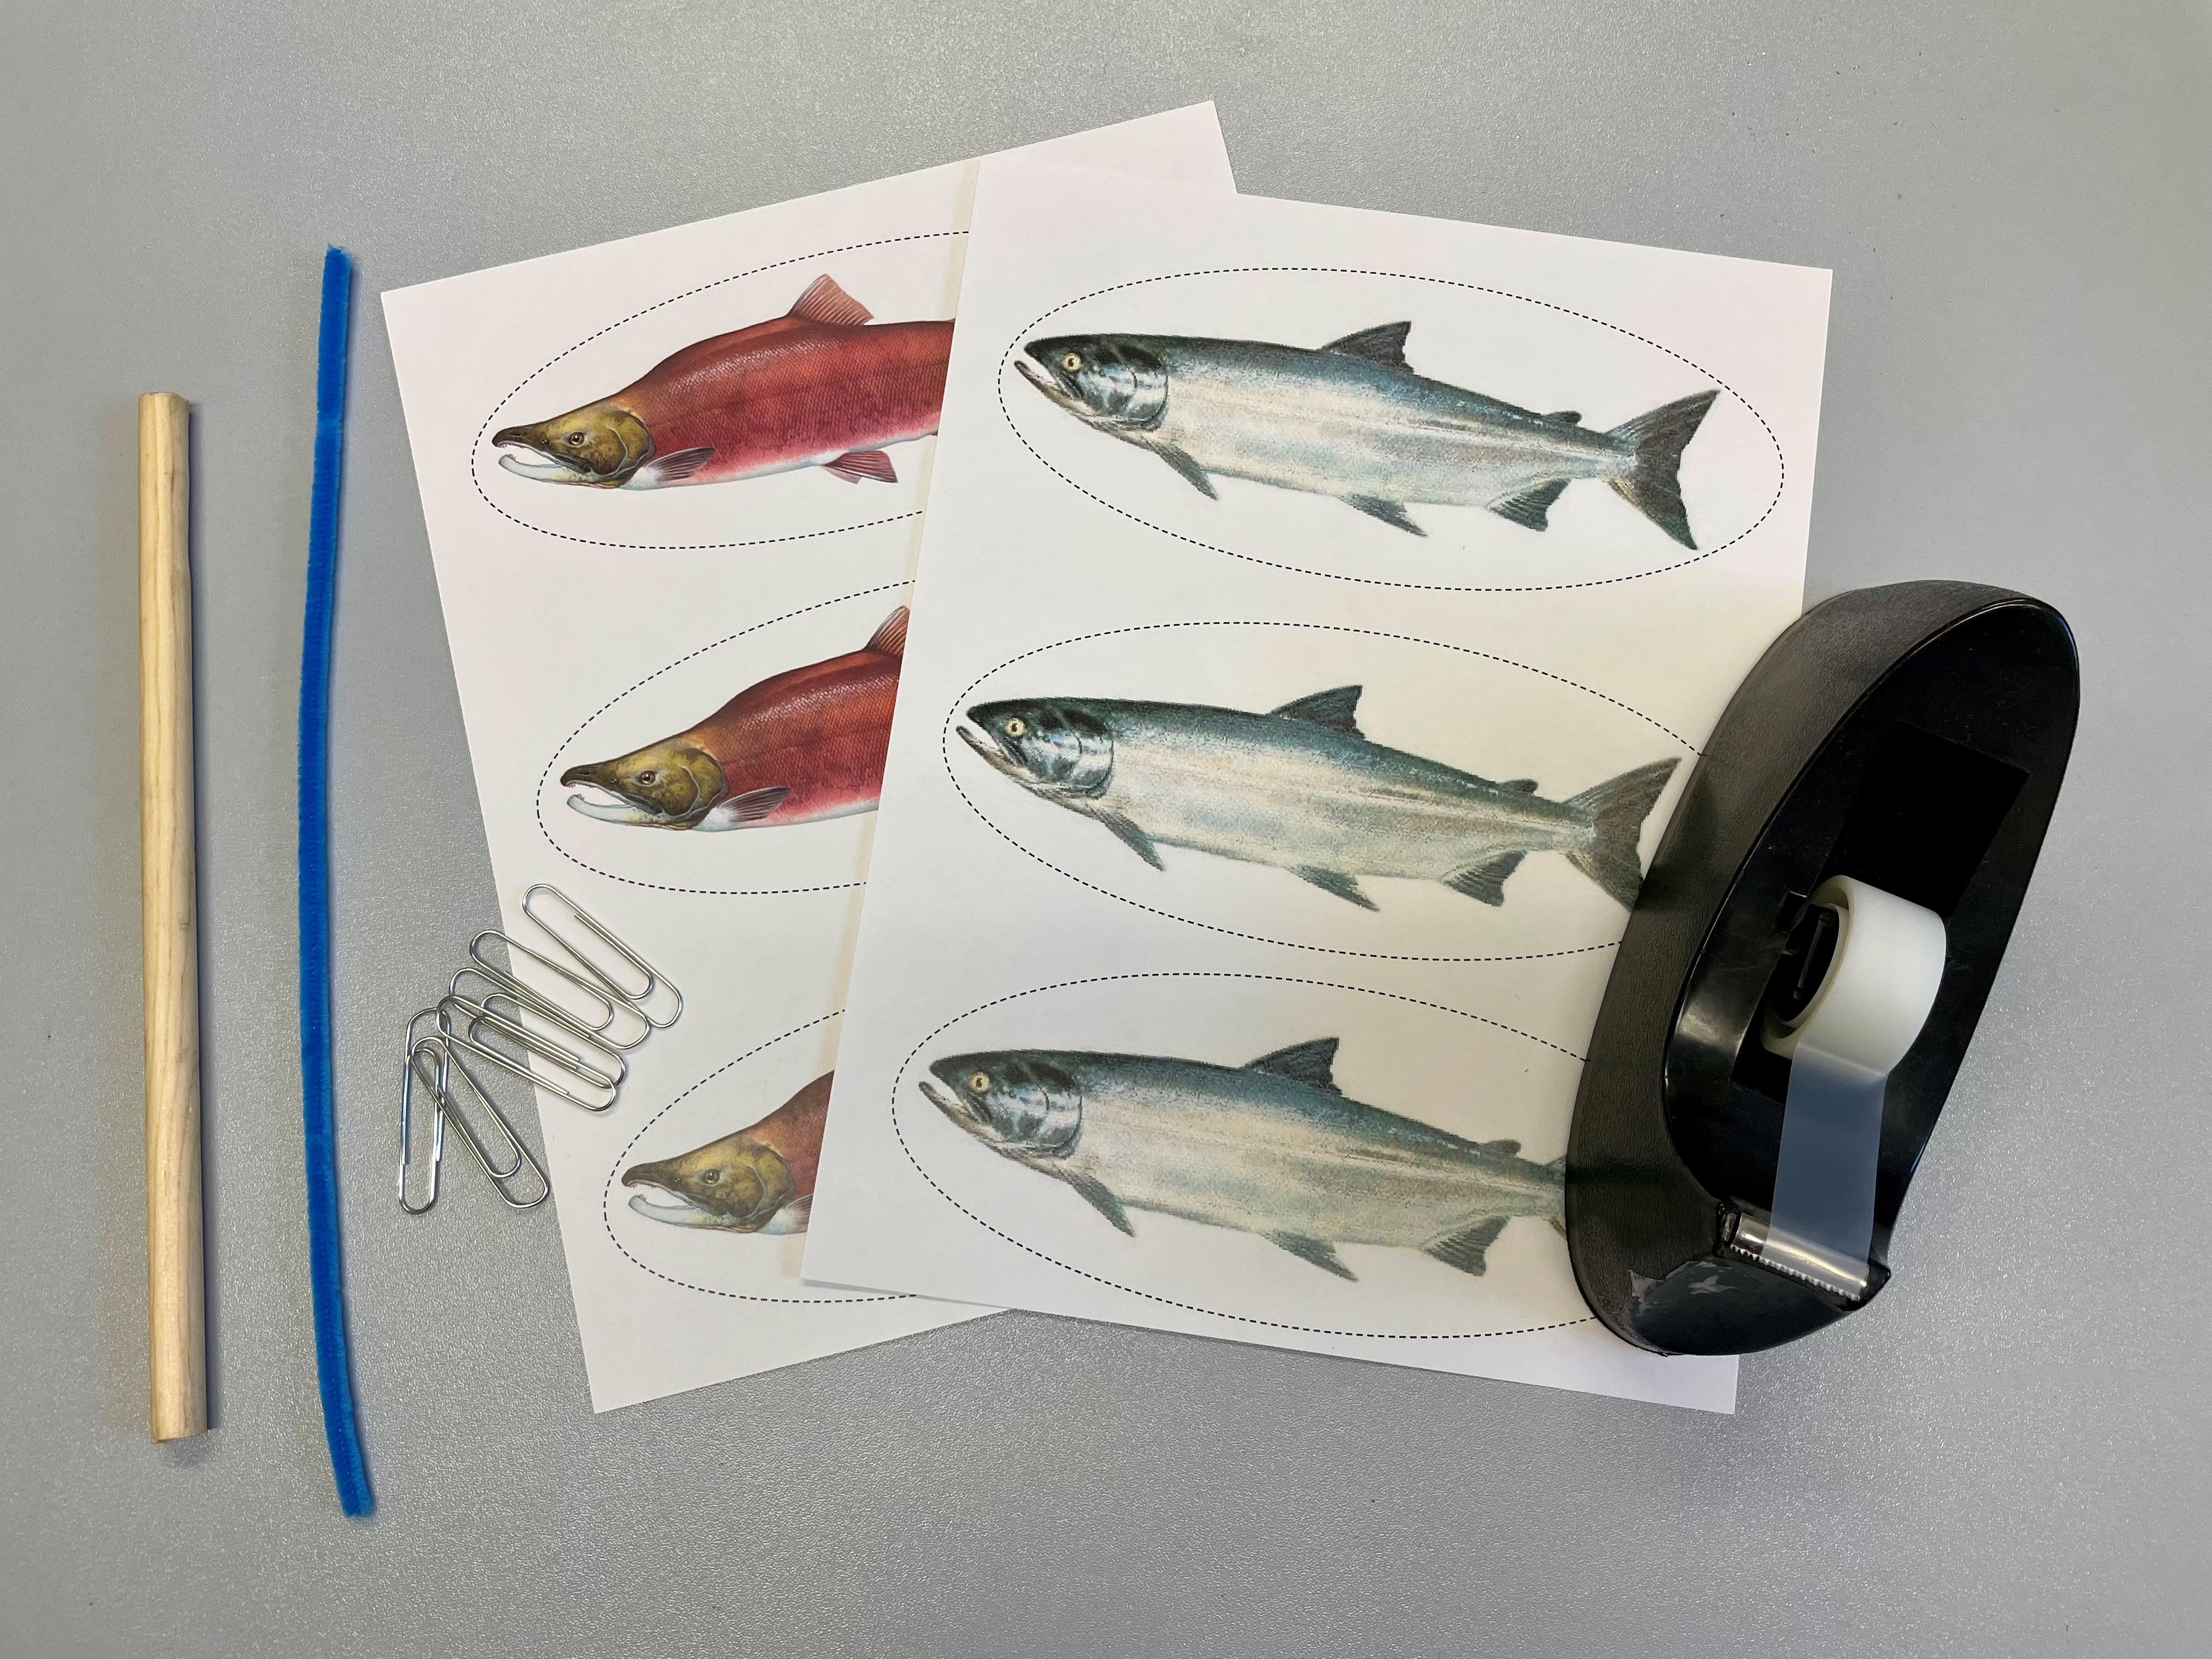 Drawings of 6 salmon ready to be cut out for a craft